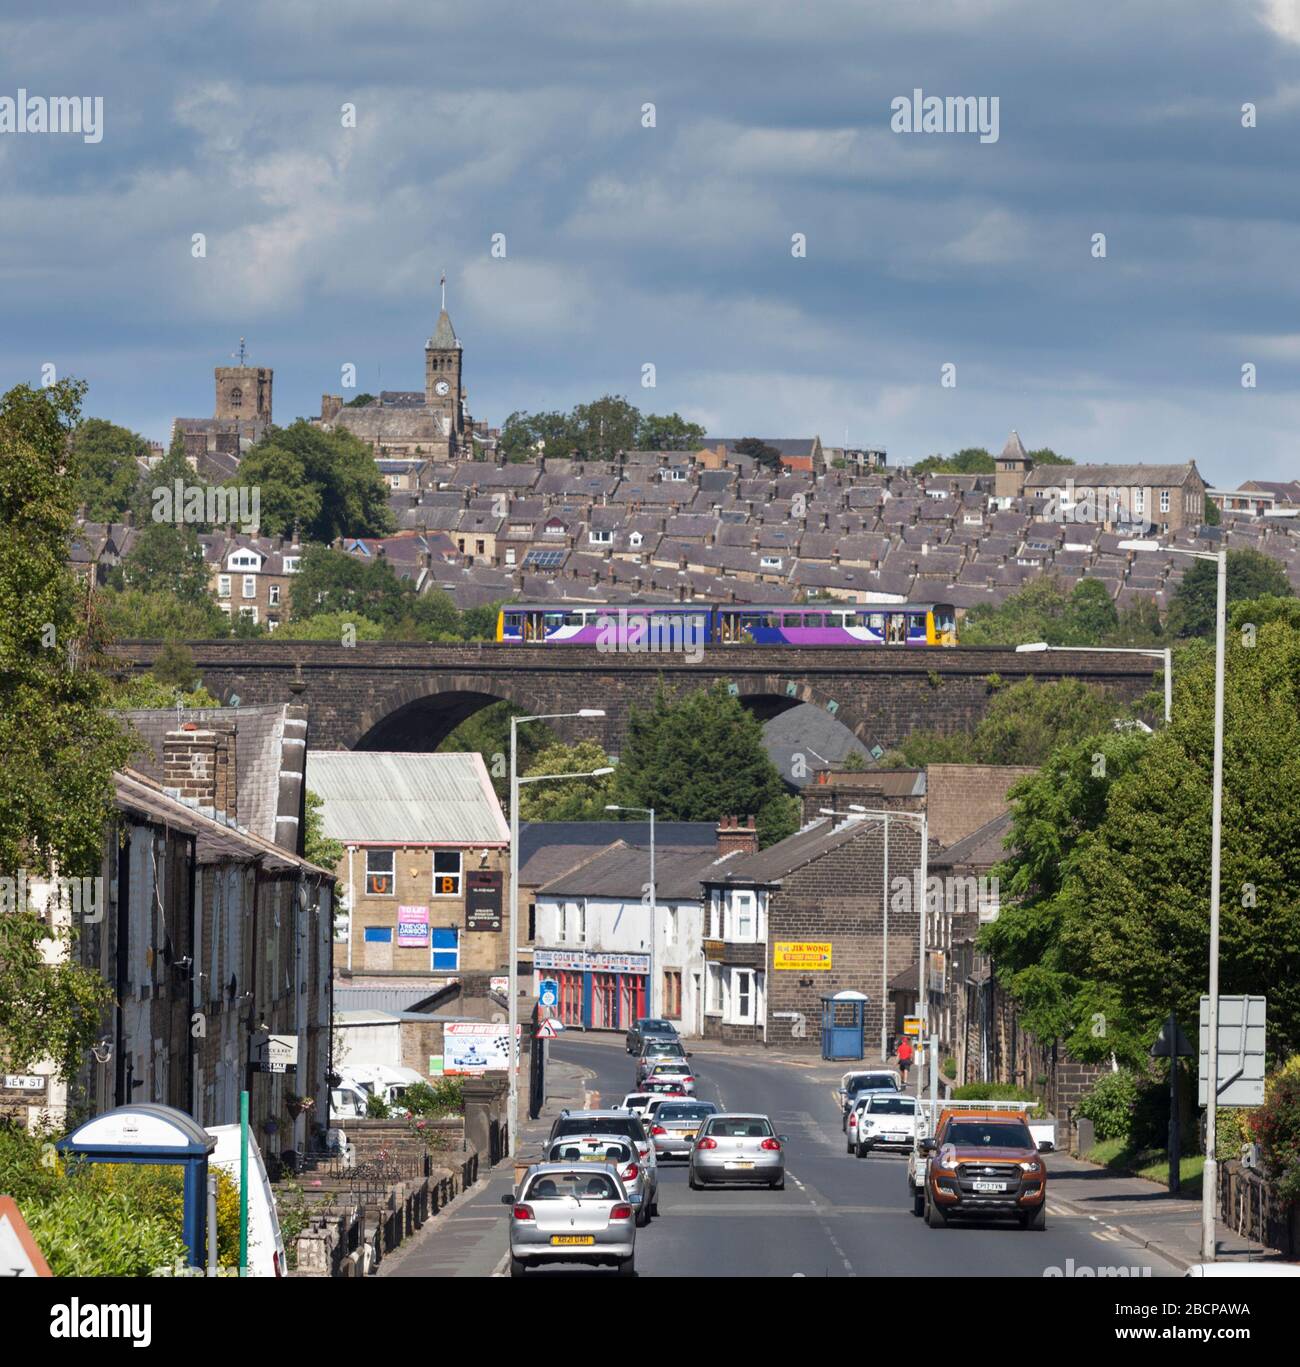 Northern Rail / Northern Trains class 142 pacer train crossing Cole viaduct seen looking down Burnley road, the main street. Stock Photo